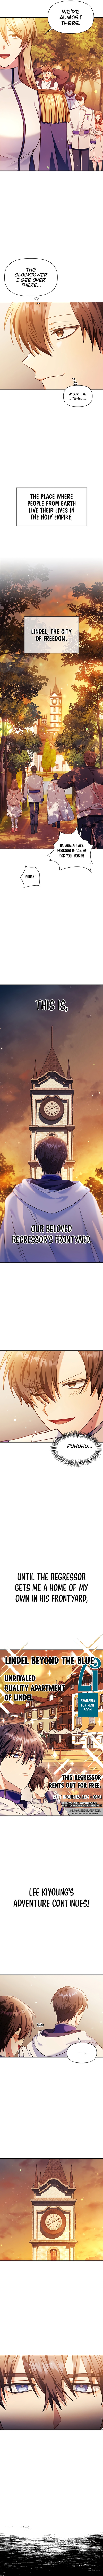 Regressor Instruction Manual - Chapter 42 Page 7